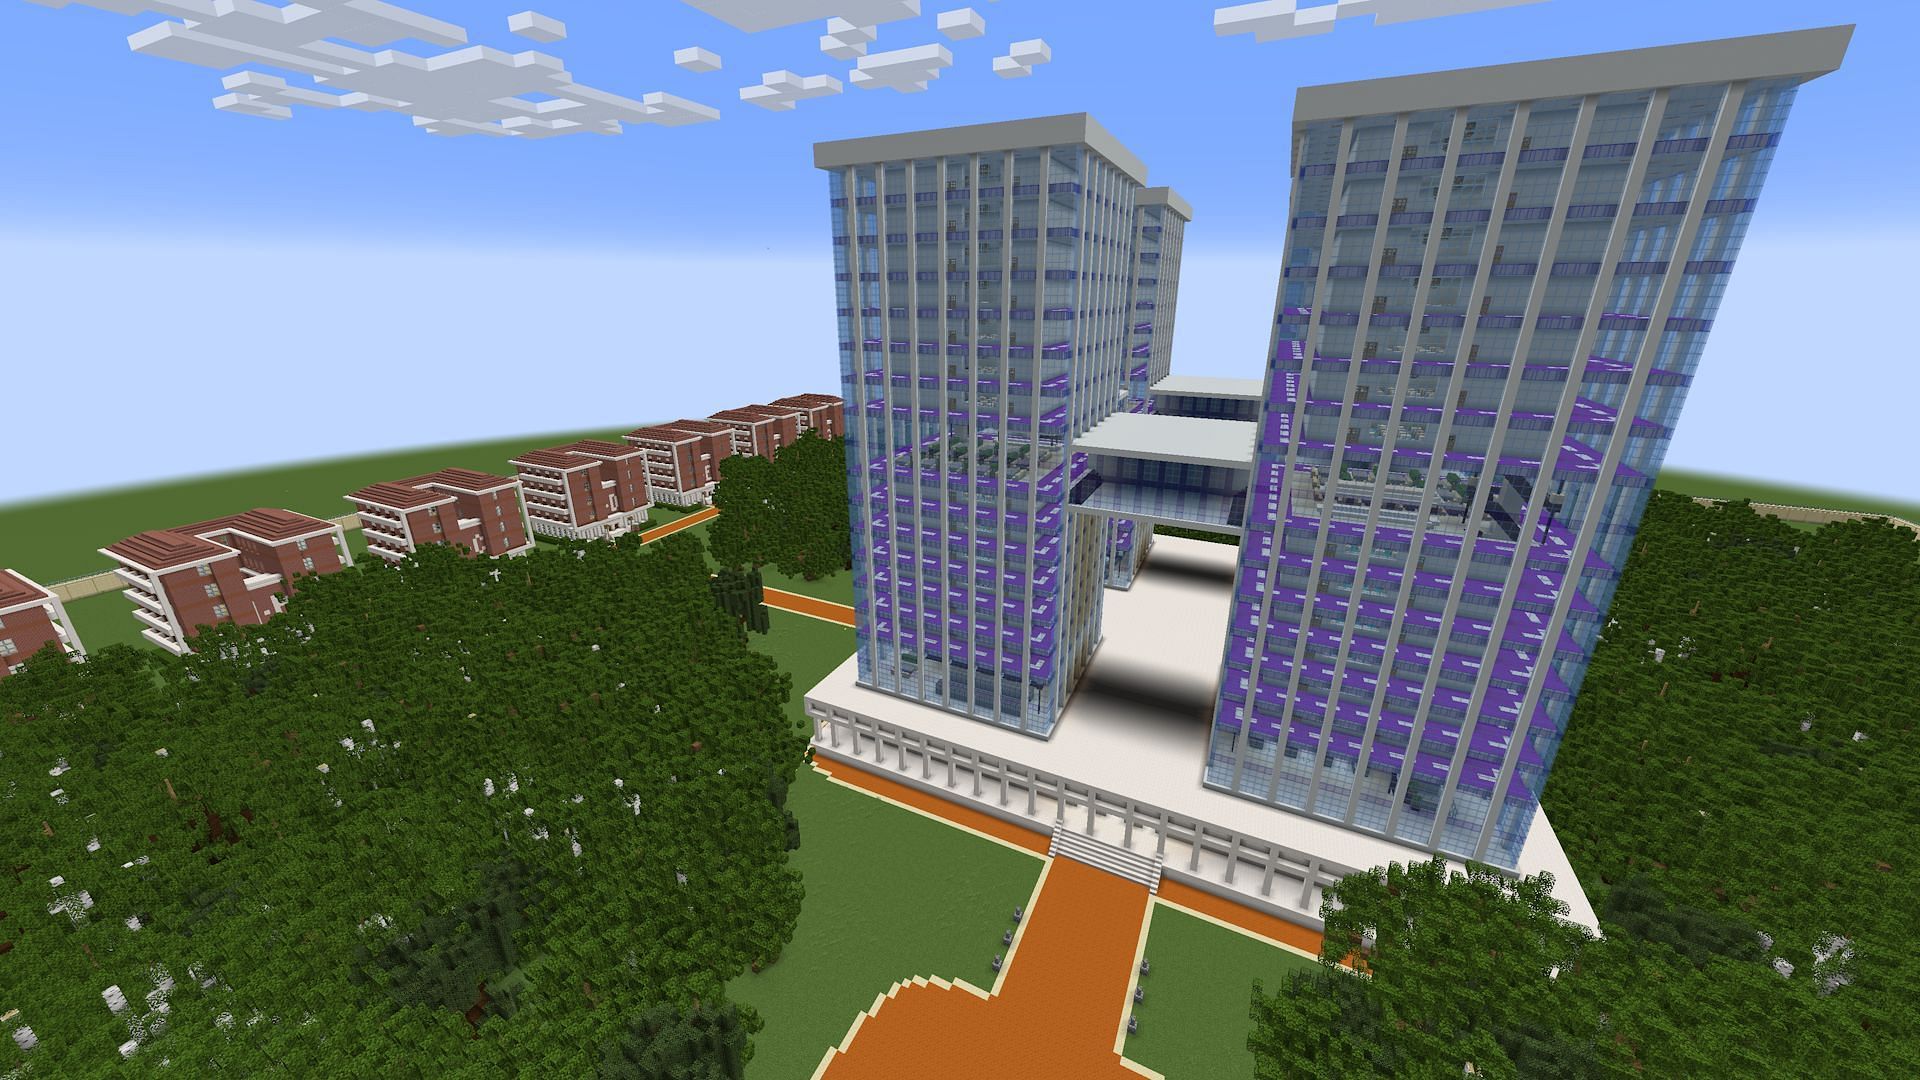 This UA high build is older, but still impressive in scale. (Image via ShafroPlaysMC/PMC)